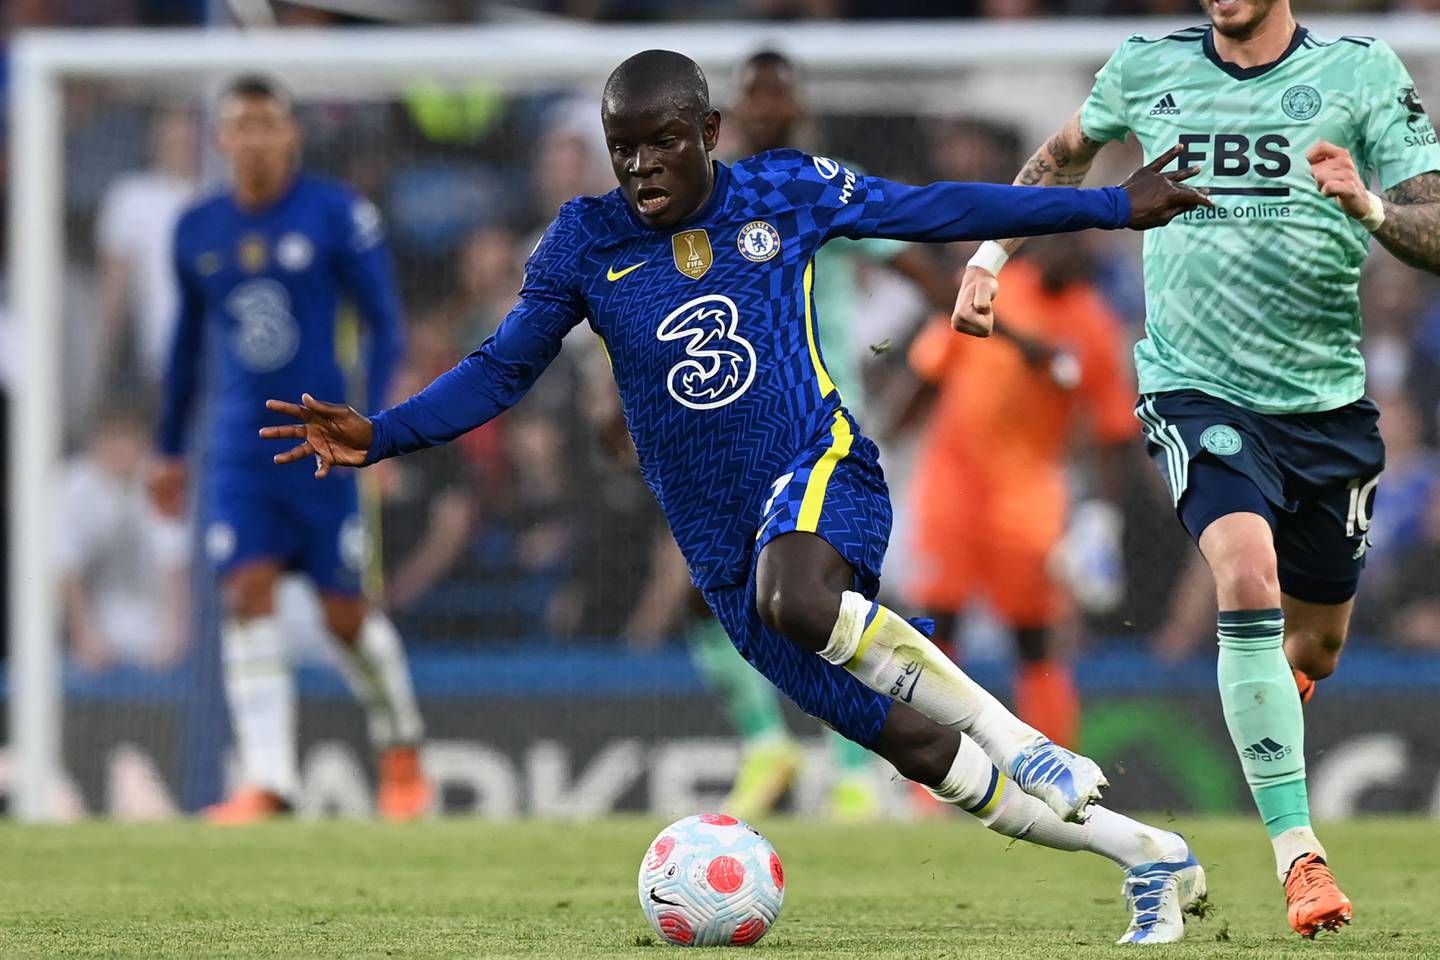 Chelsea's French midfielder N'Golo Kante. AFP